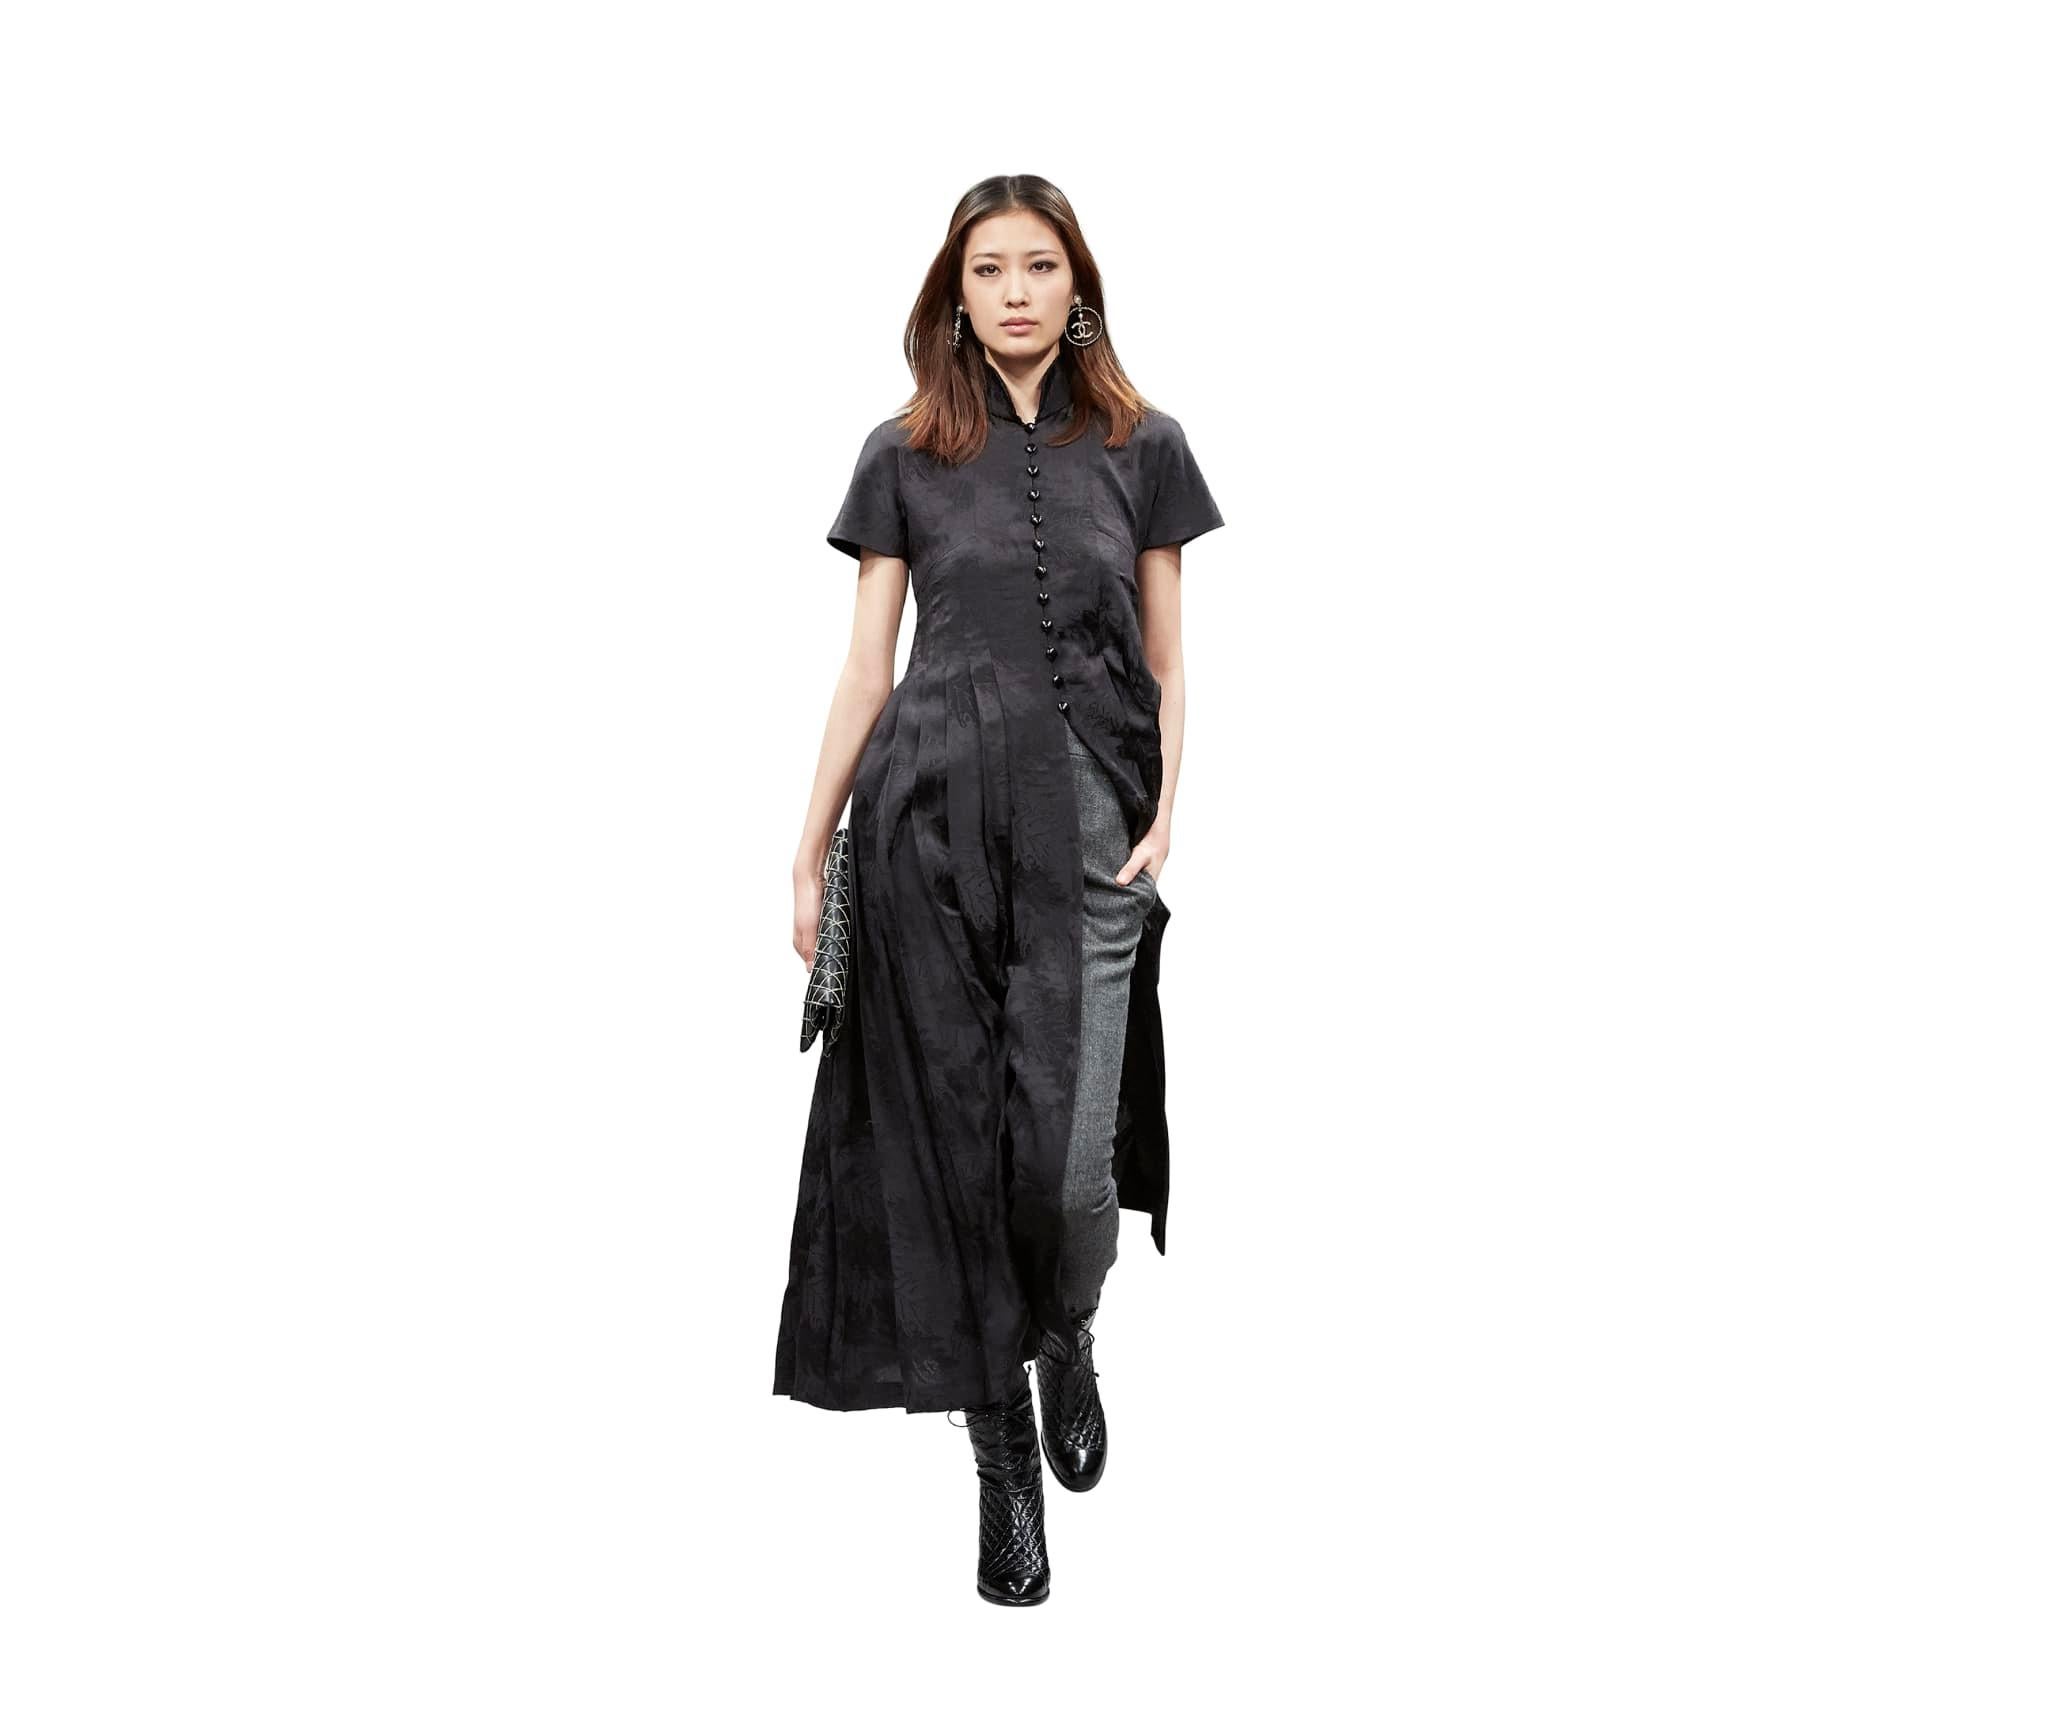 100% authentic Chanel Pre-Fall 2018 jaquard dress in black silk (100%). With a high front-slit till the waist, padded cap-sleeves, mandarin collar, leaf pattern and pleats. Meant to be worn over pants. Closes with black round CC-buttons in the